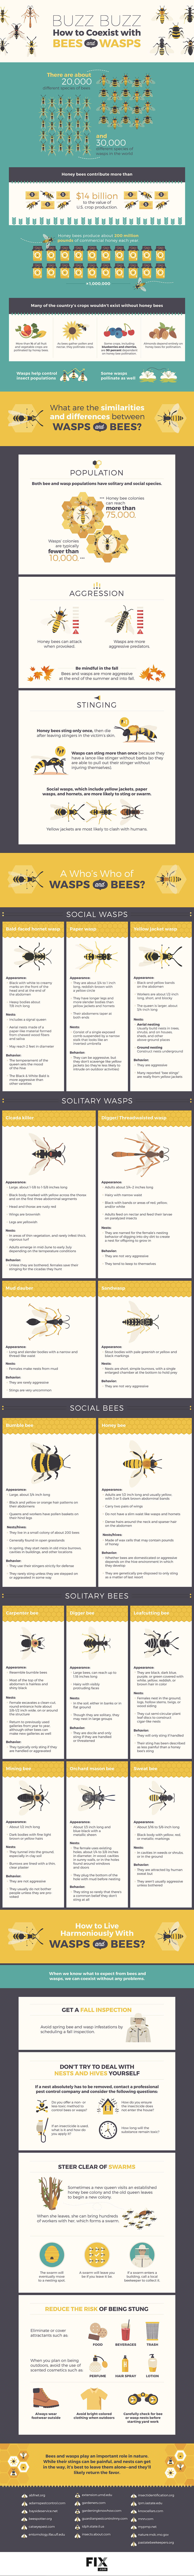 Bee or Wasp? an infographic on pixiespocket.com